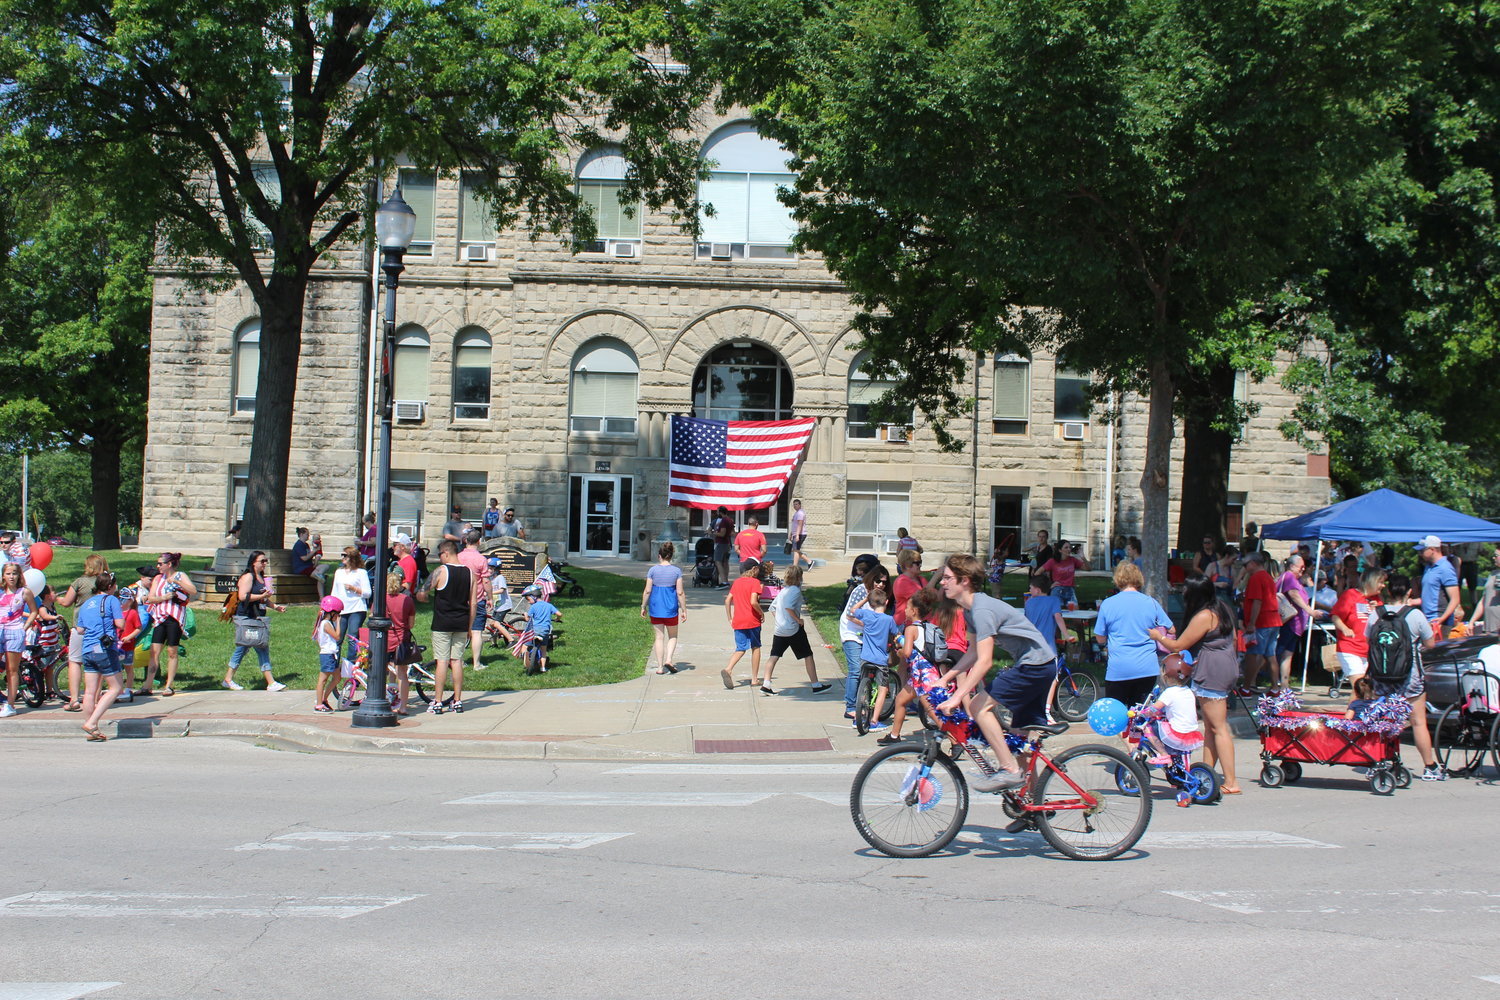 Participants ride their decorated bikes through downtown Warrensburg during the 2021 Patriotic Children’s Bike Parade. Warrensburg Main Street will host the 2022 parade on Saturday morning, July 2.